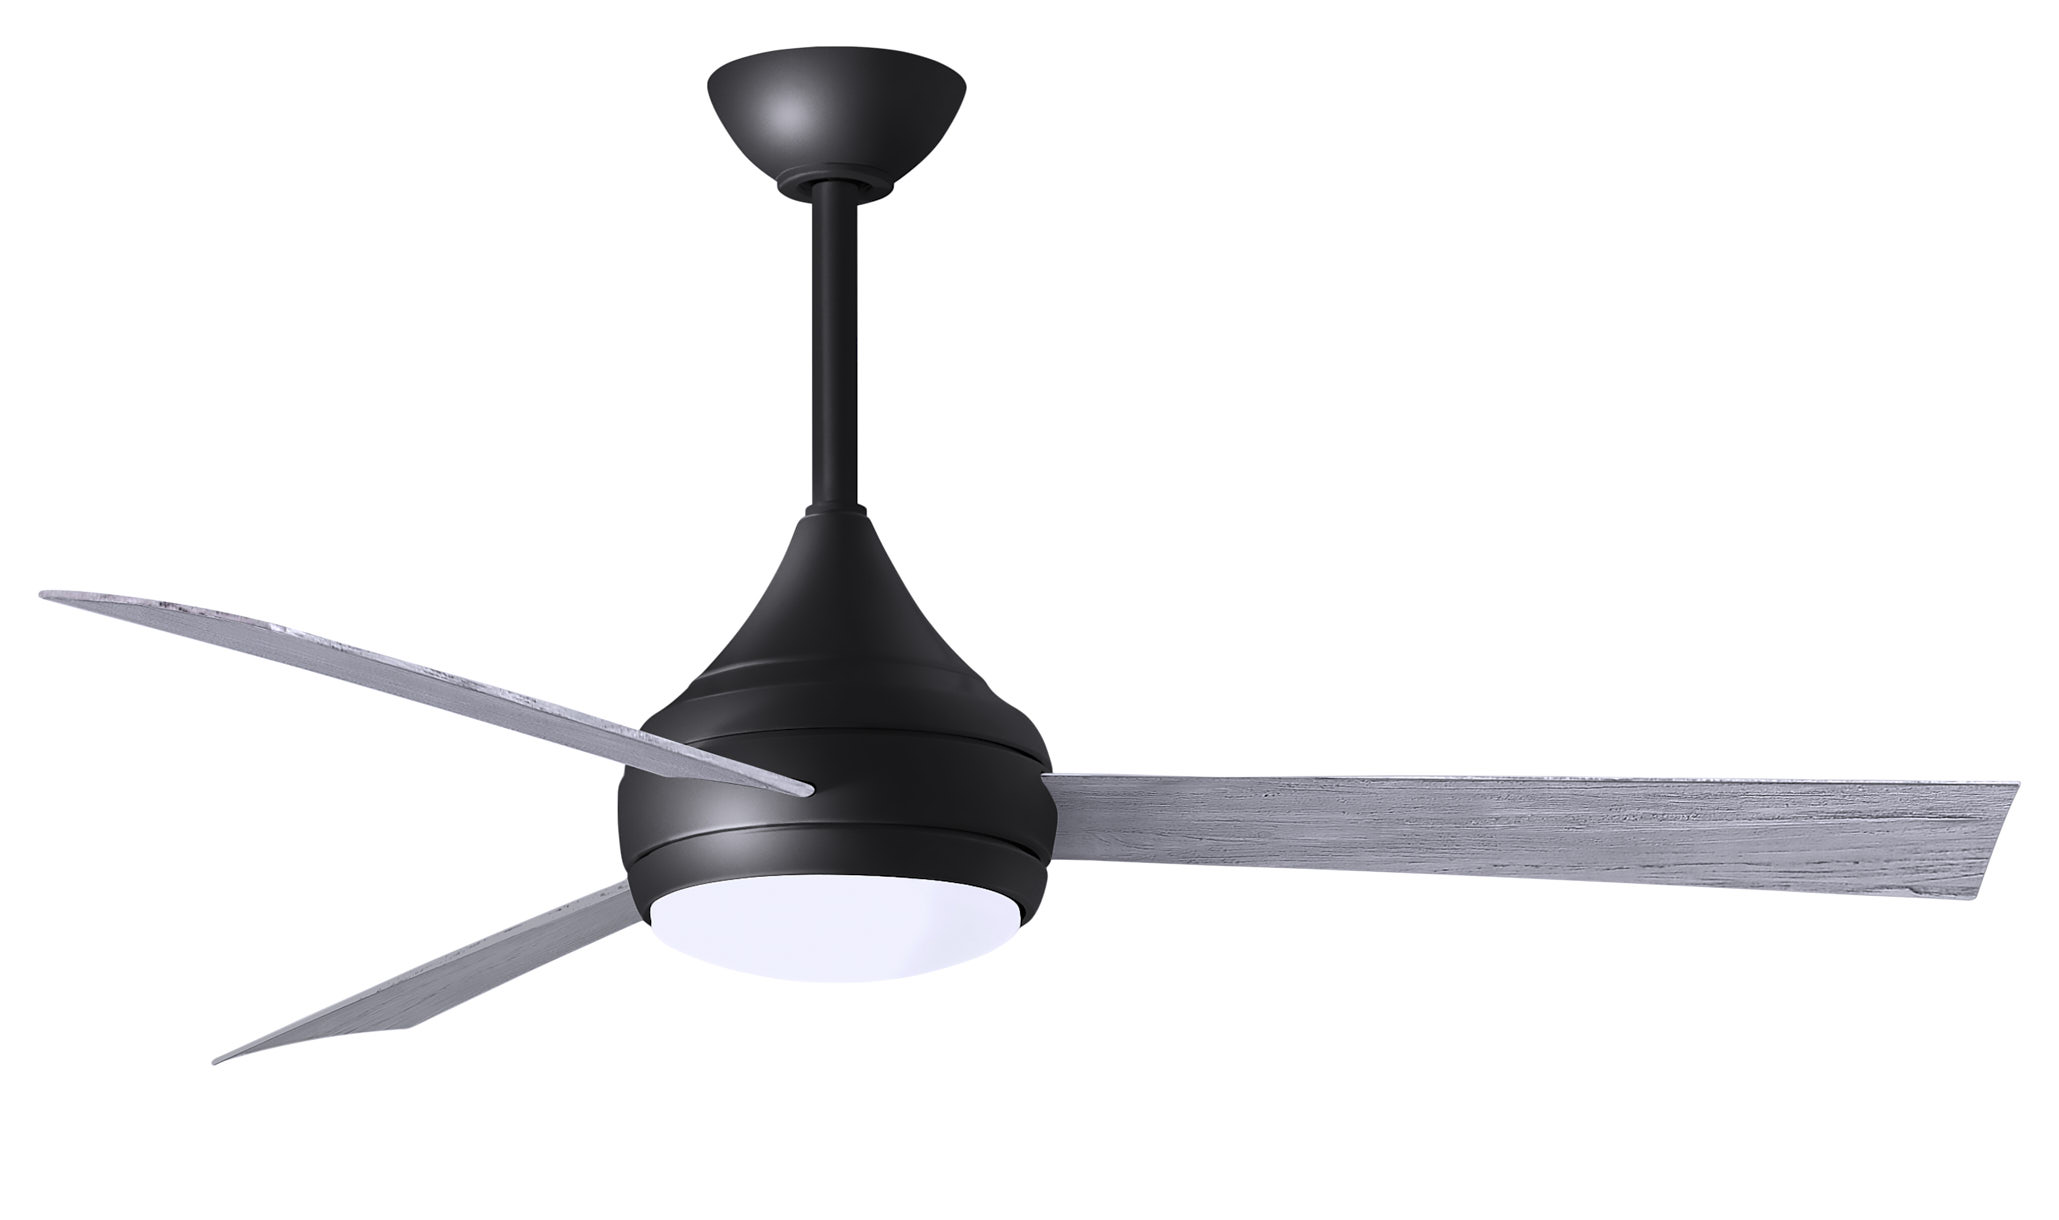 Donaire ceiling fan in Matte Black with Barn Wood blades without light cap manufactured by Matthews Fan Company.